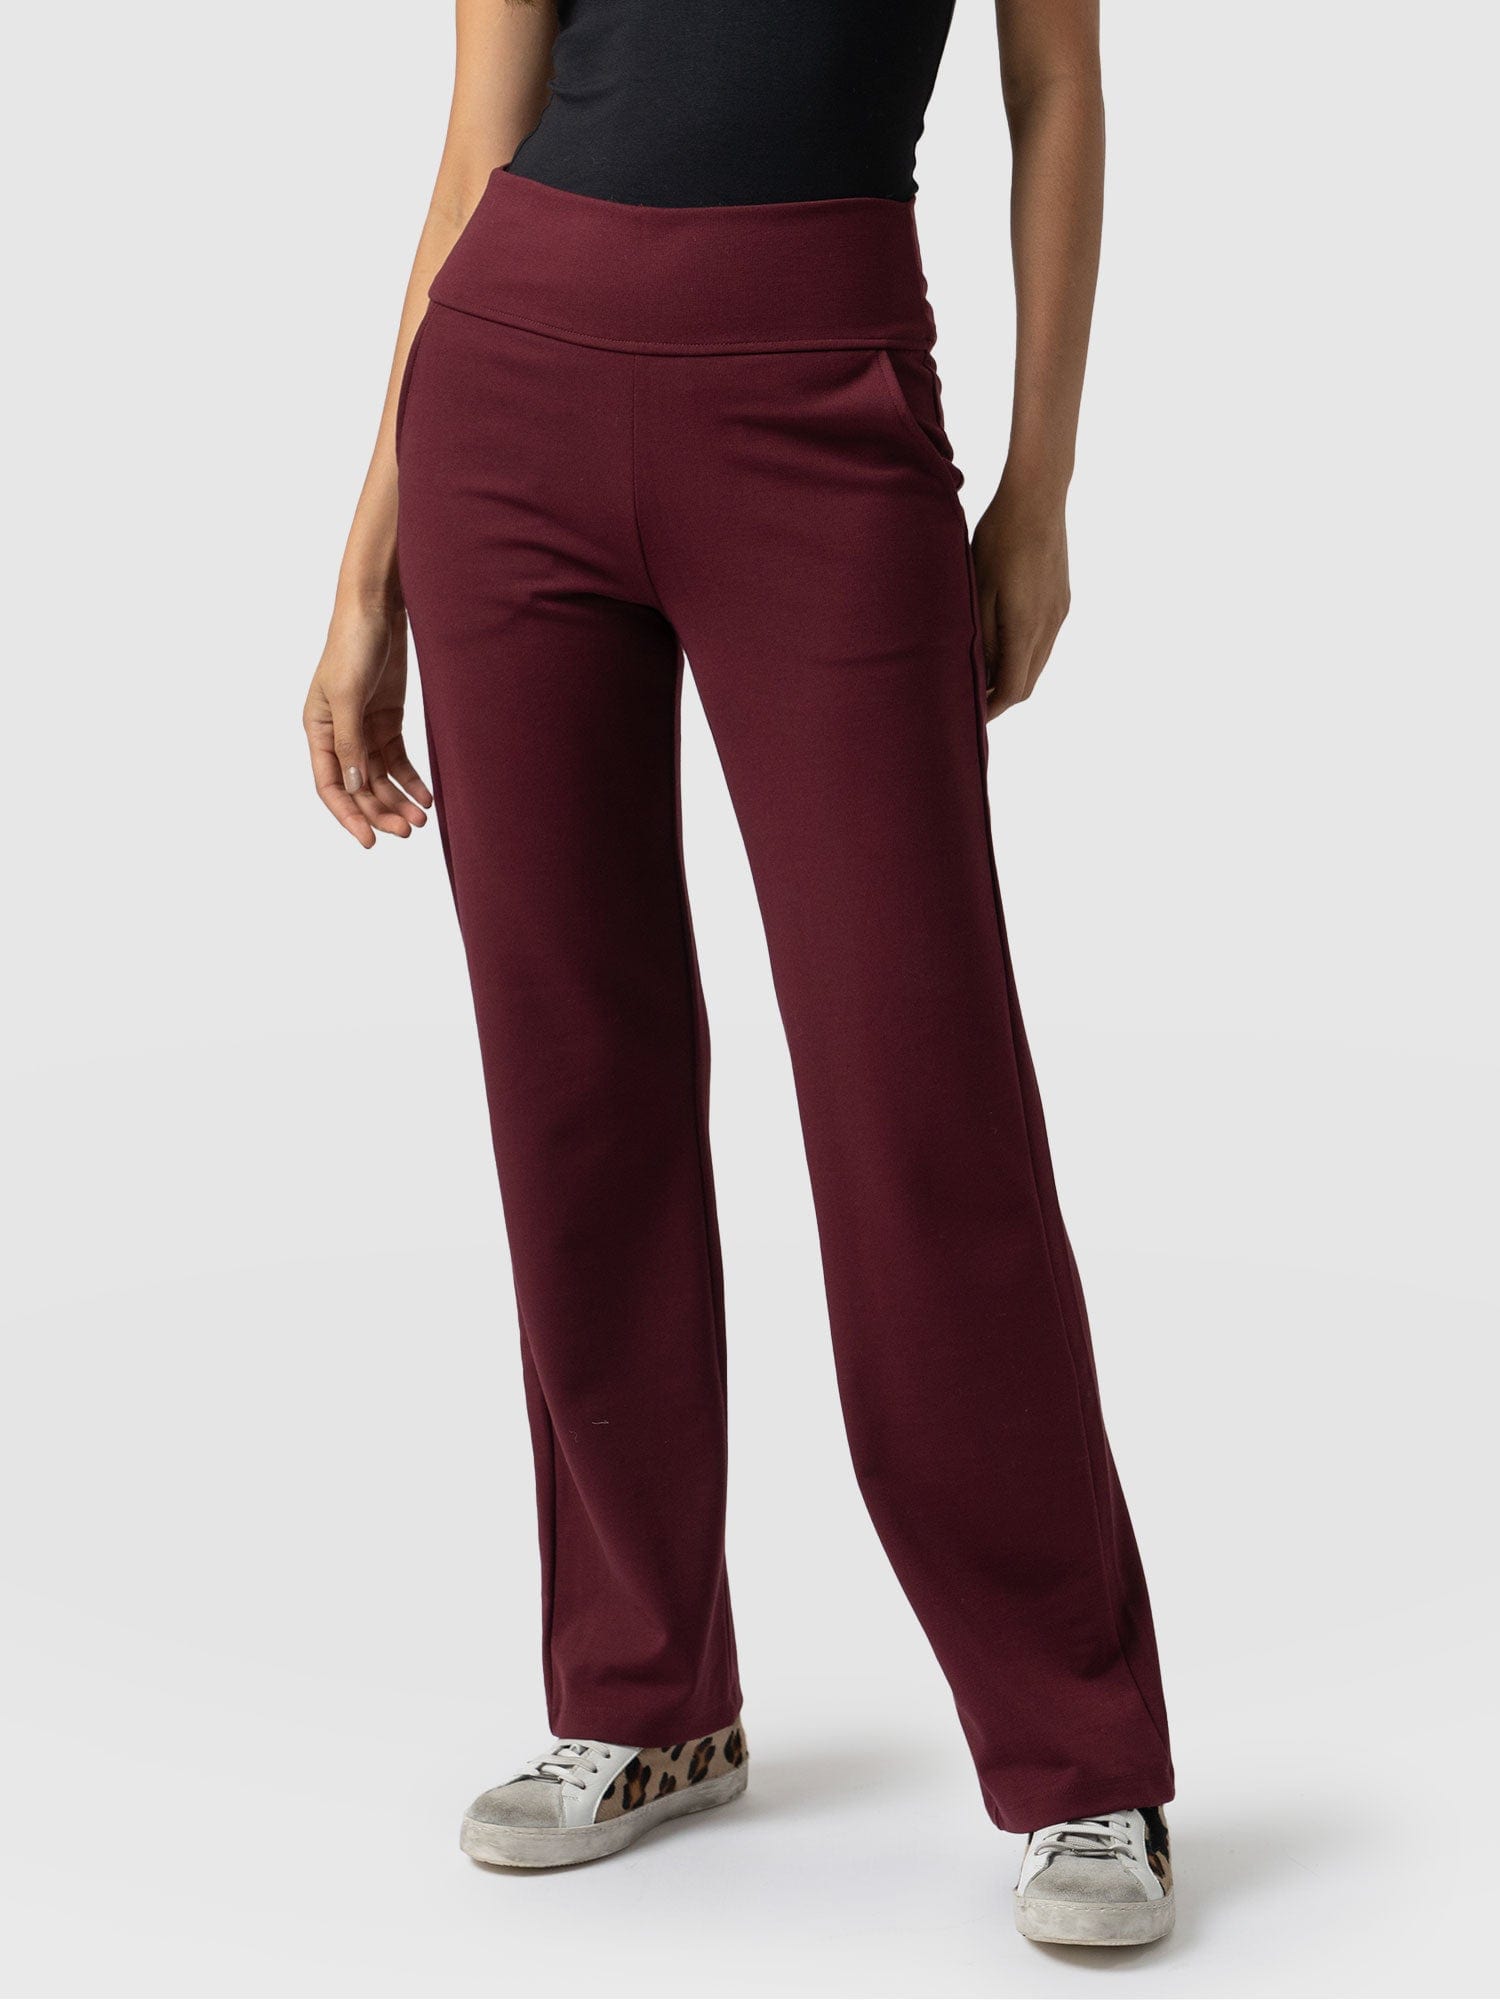 Womans Divided by H&M Super Skinny High Waist burgundy EUR 34 UK 8 trousers  NEW | eBay